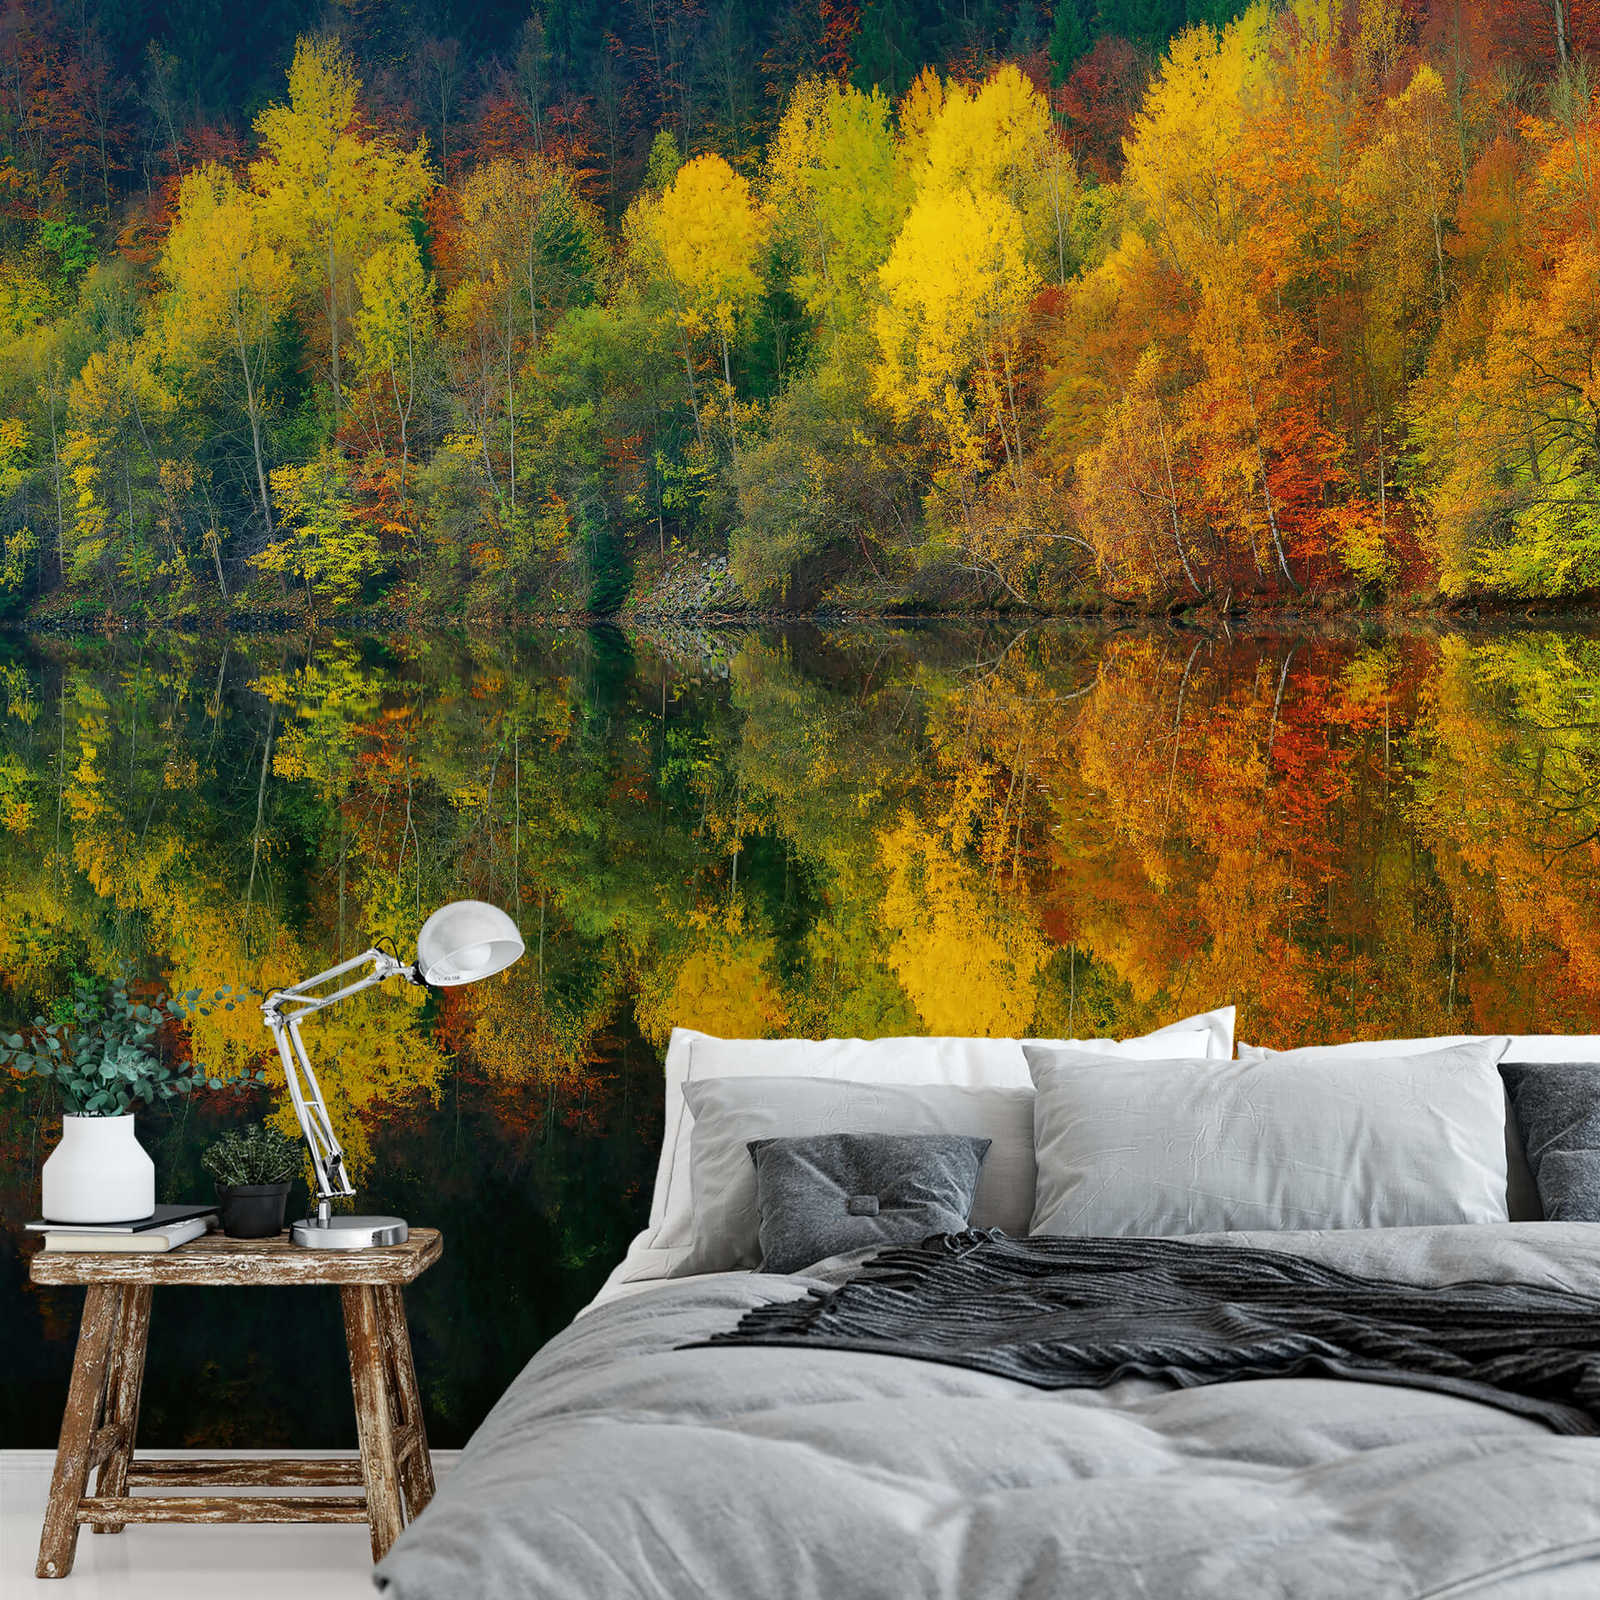             Photo wallpaper forest on the lake in autumn - yellow, orange, green
        